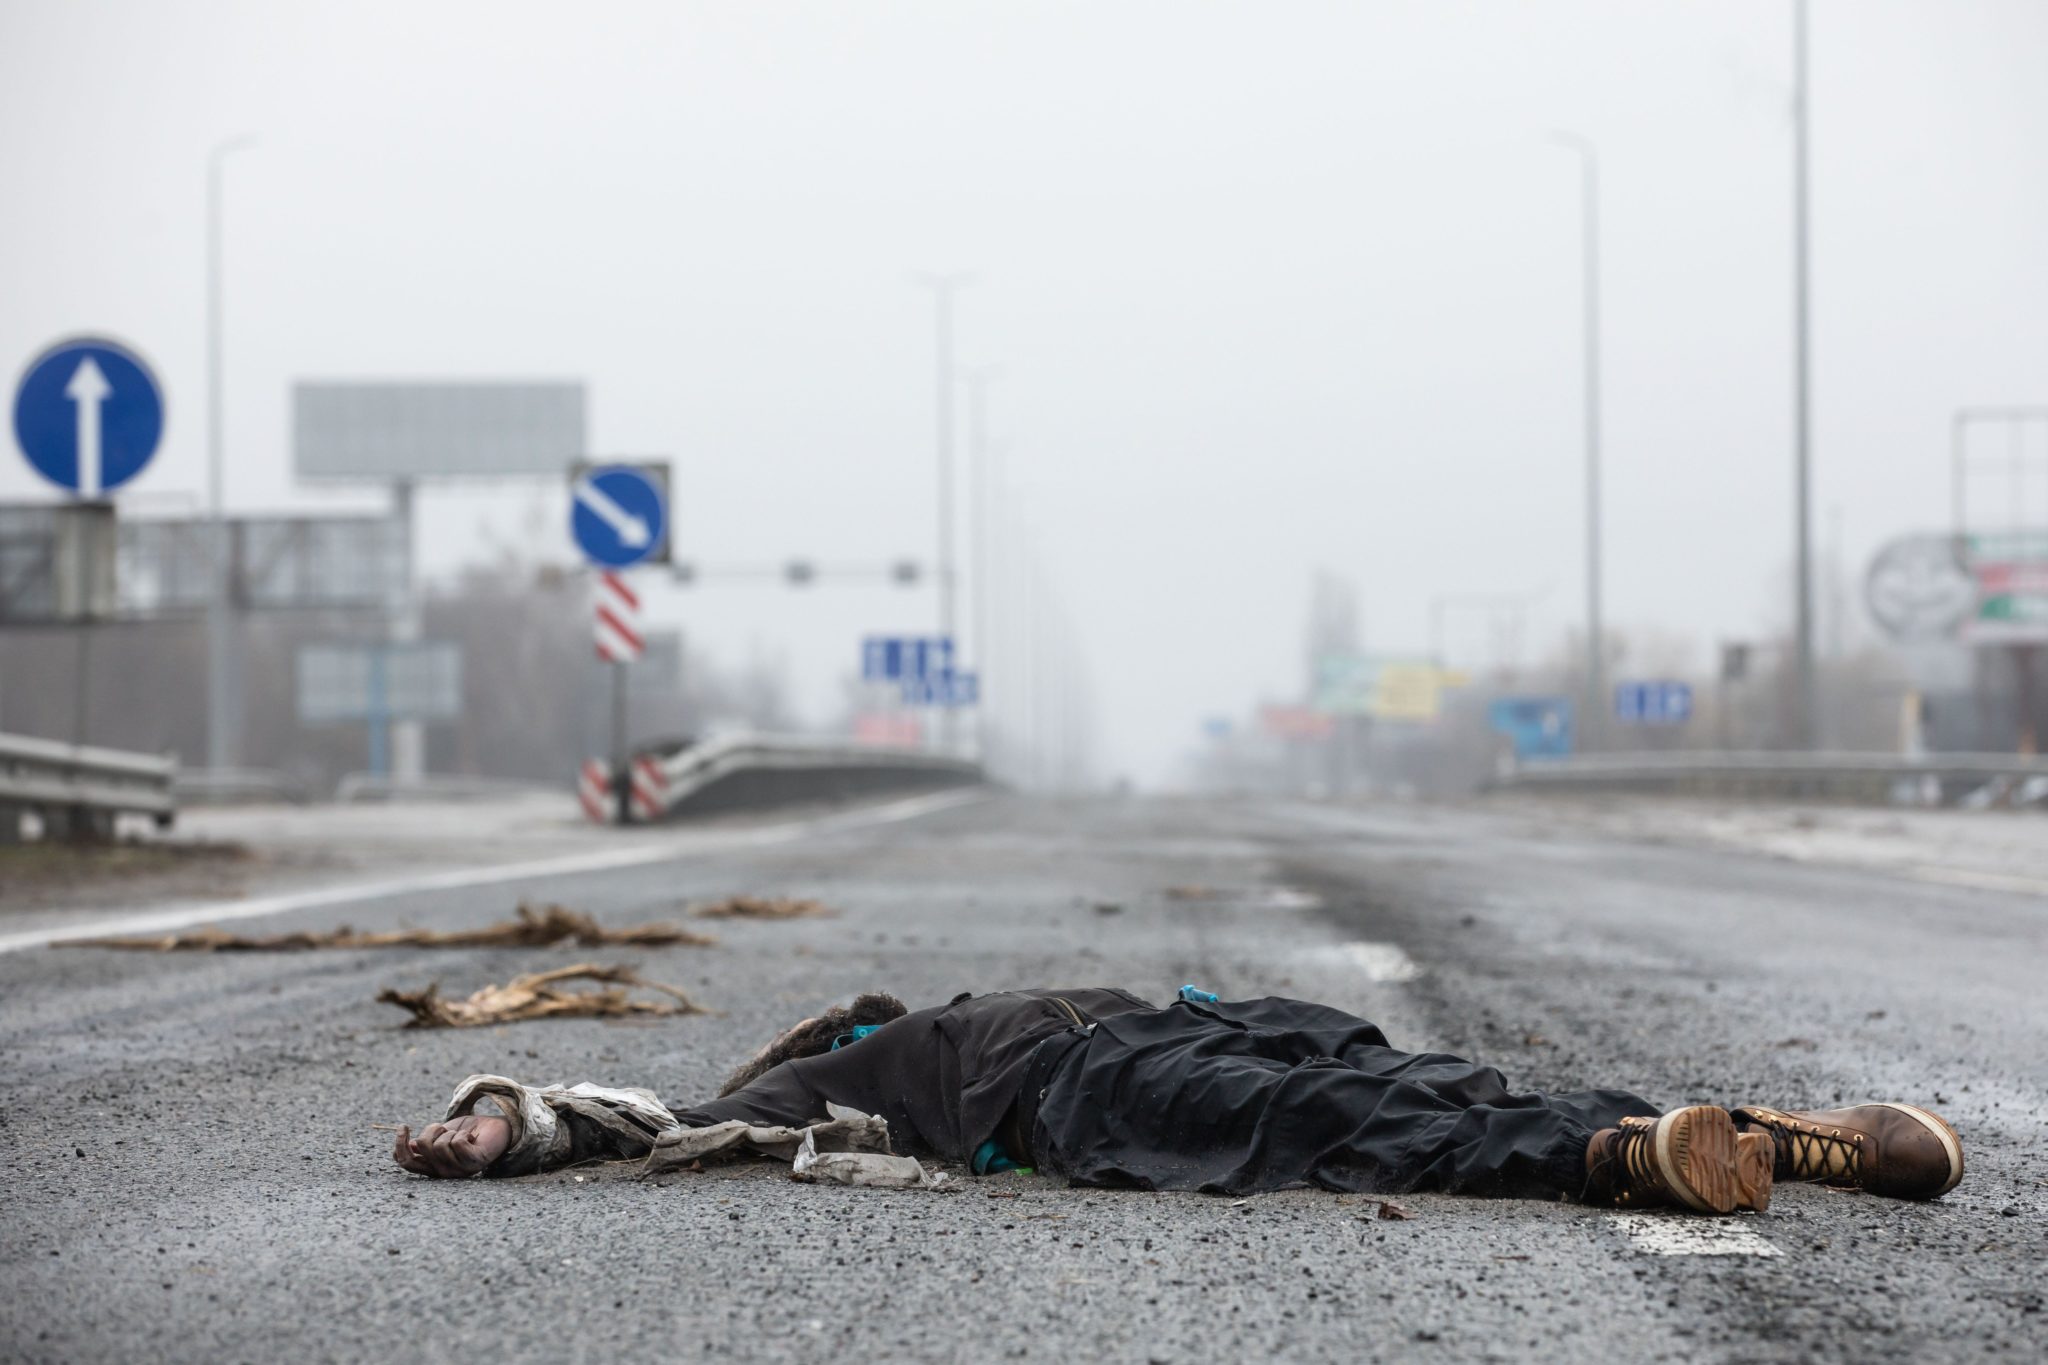 A dead civilian seen on the side of the highway 20km from Kyiv, 02-04-2022. Image: ZUMA Press Inc / Alamy Stock Photo 